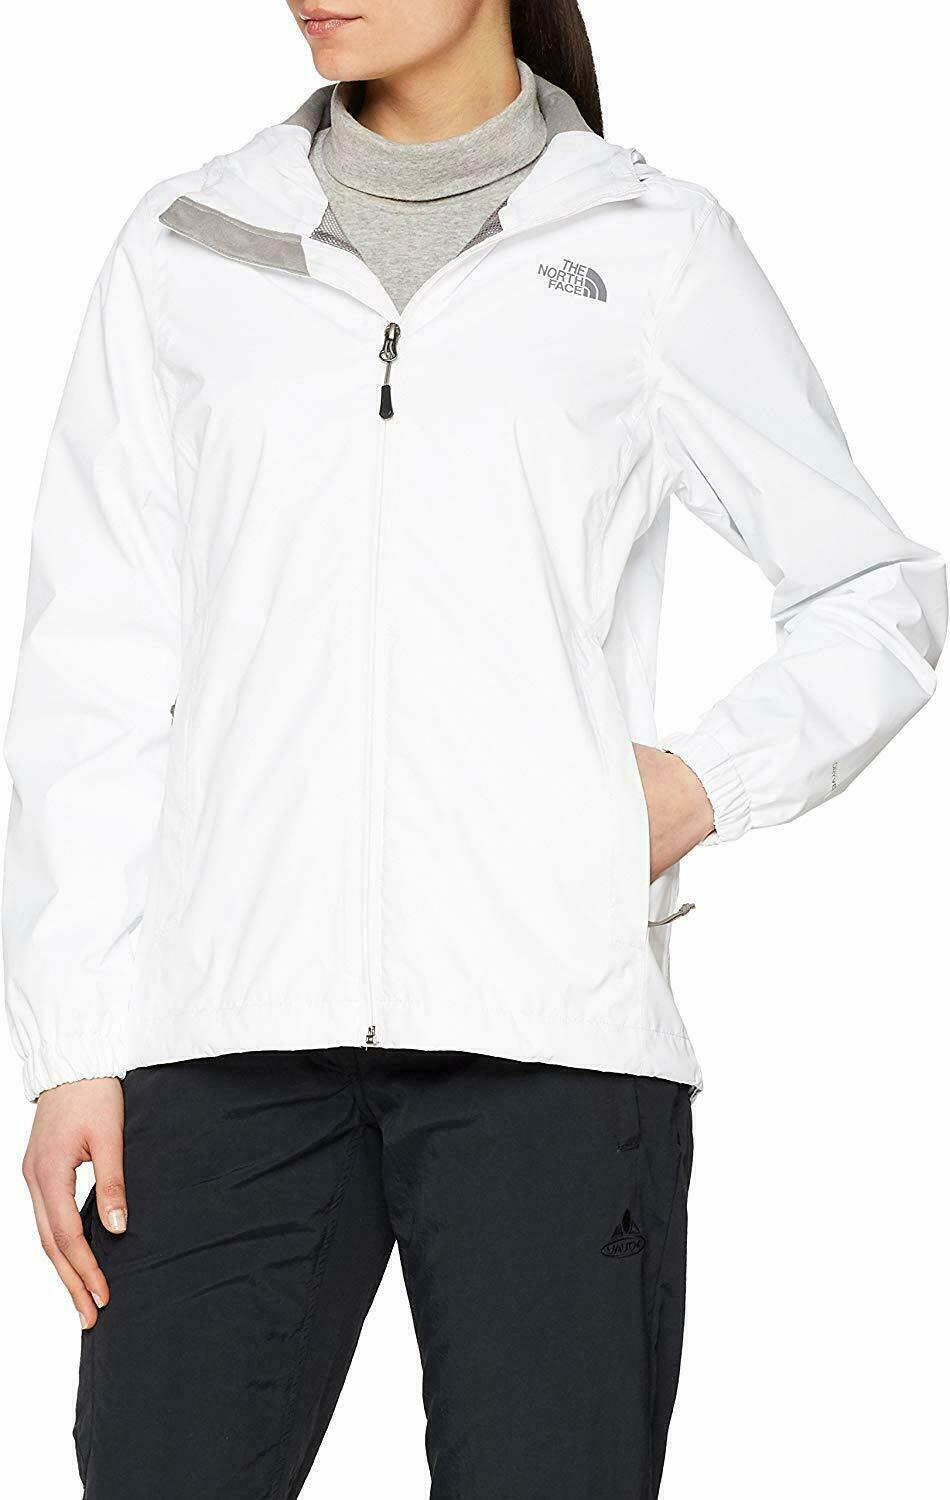 NWT The North Face Ladies Quest Dryvent Water Resistant Jacket(White,S) |  eBay